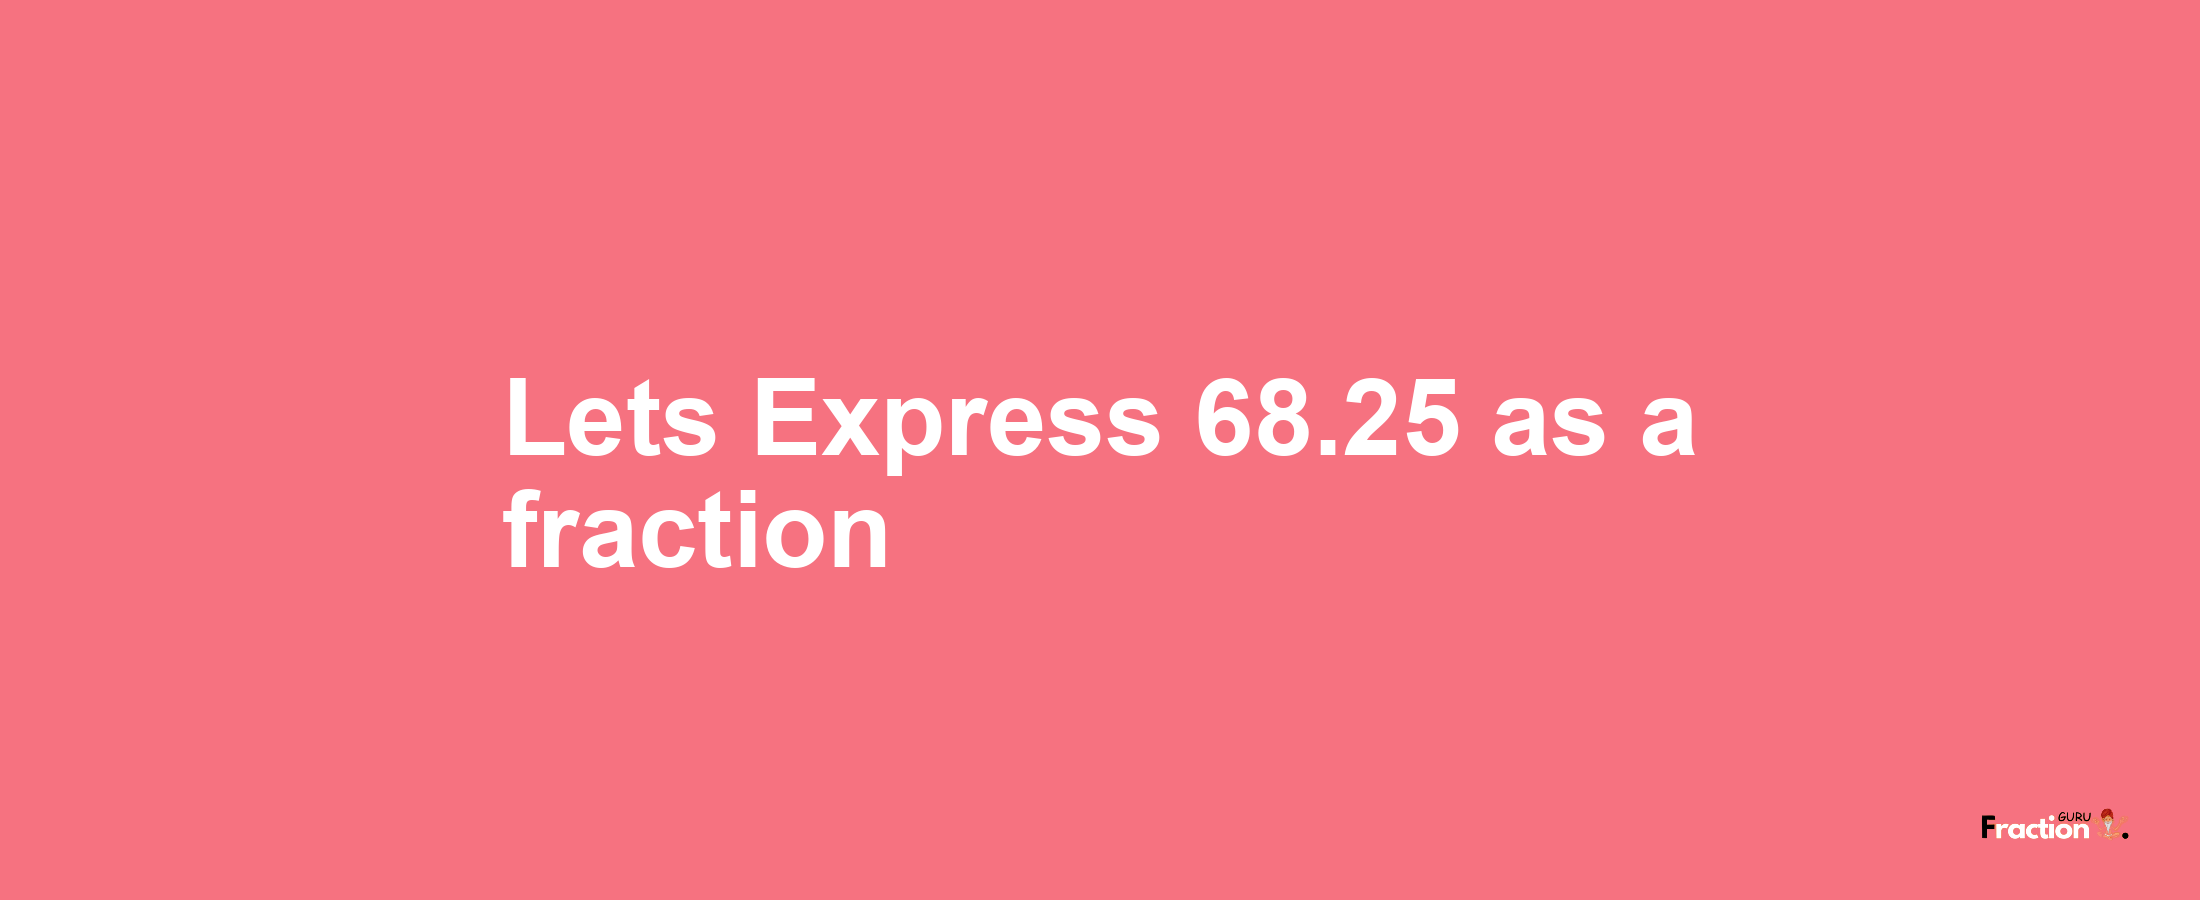 Lets Express 68.25 as afraction